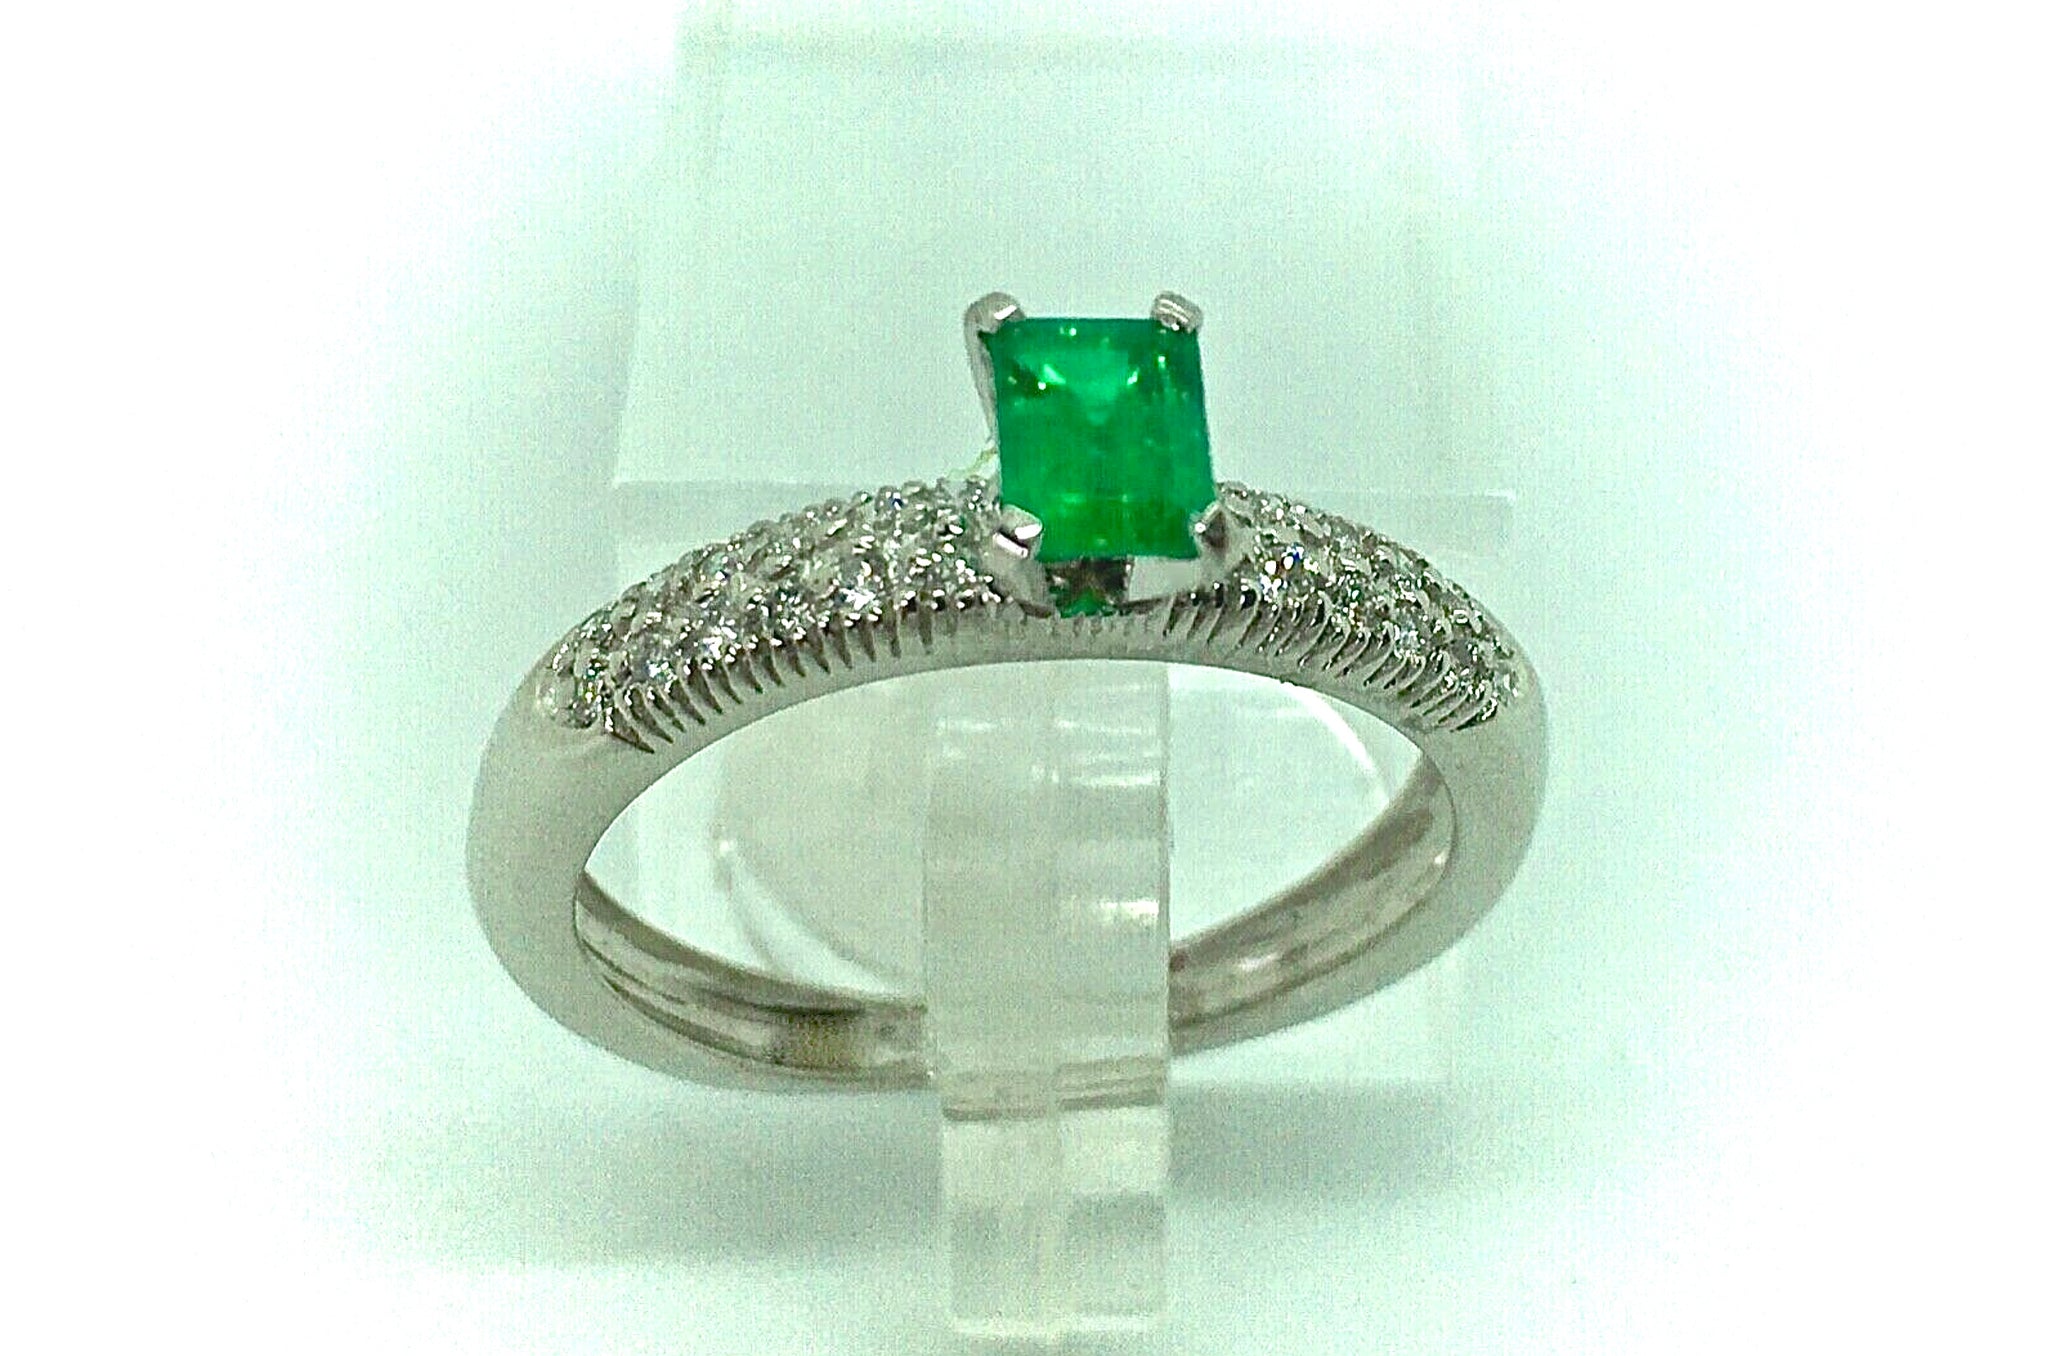 Fine Natural Colombian Emerald Pave Diamond Engagement Ring